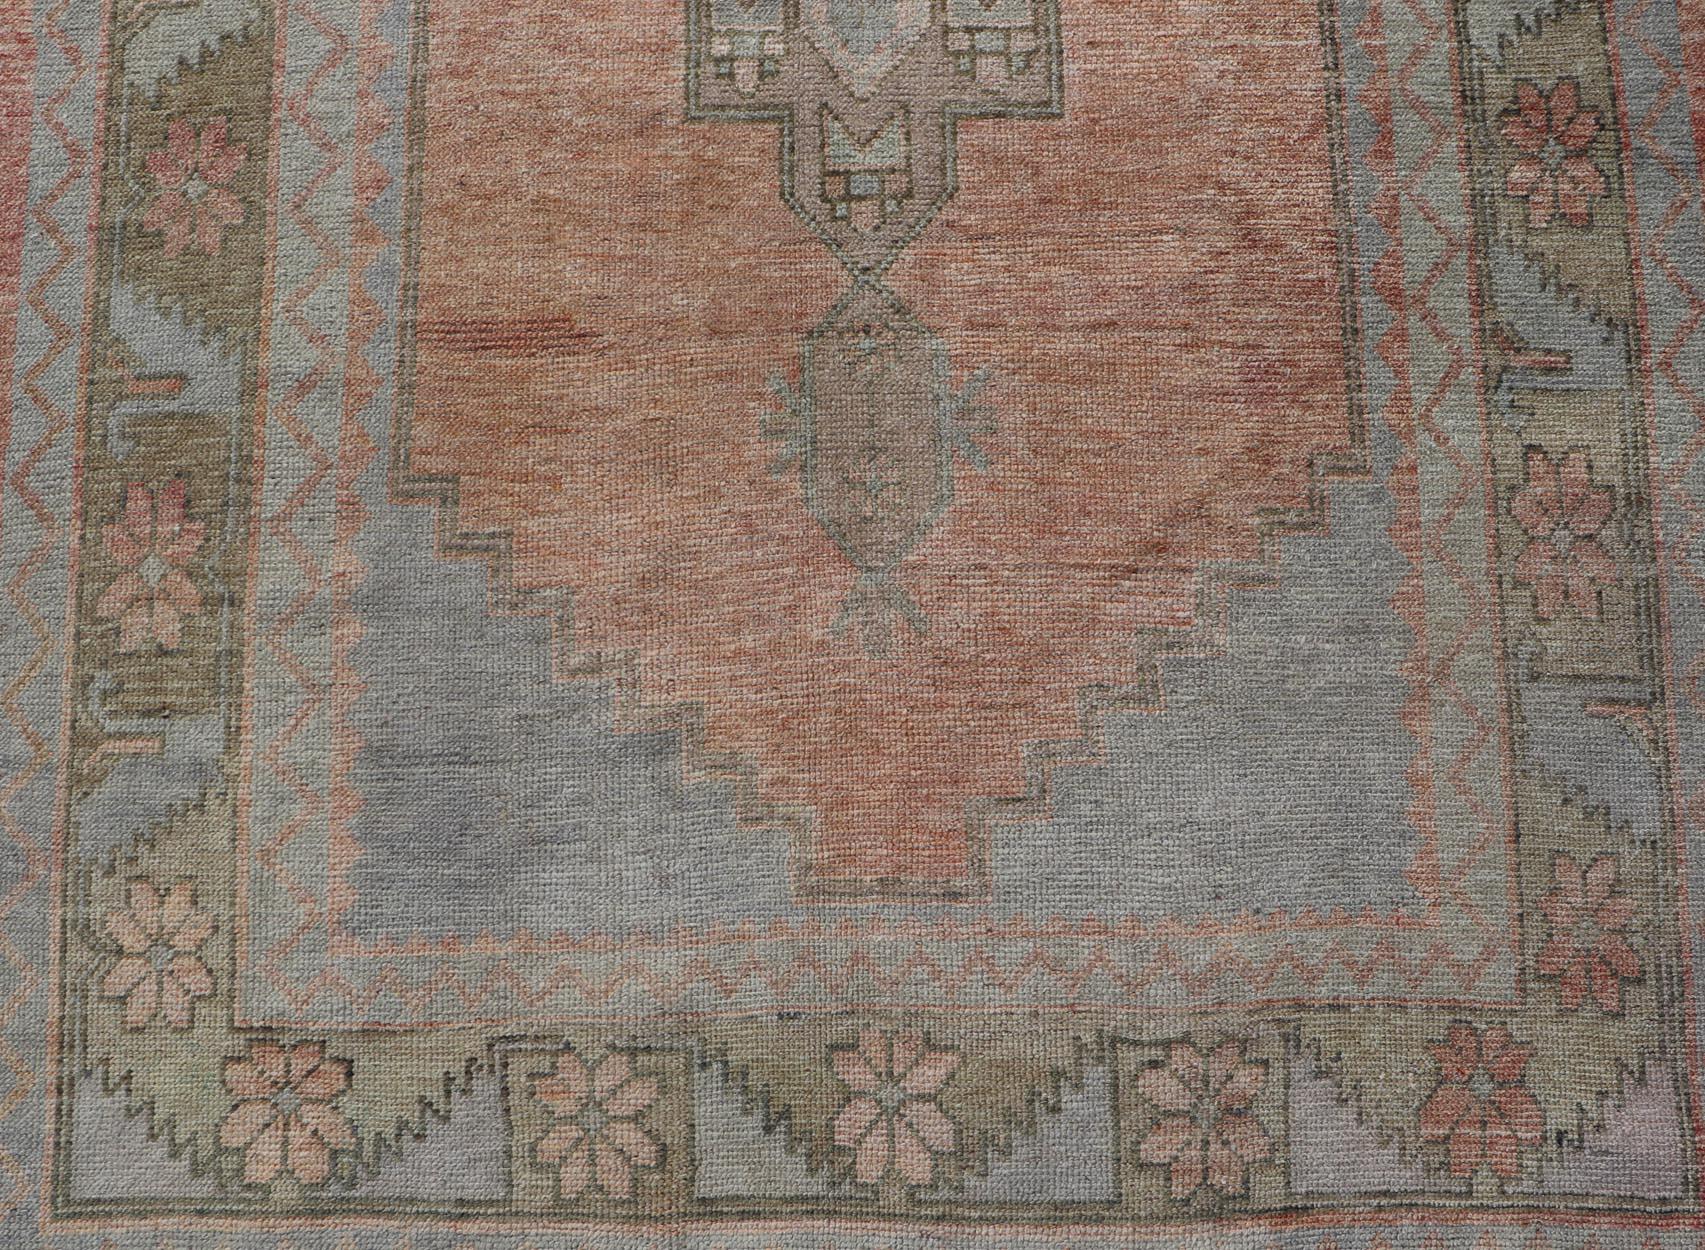 Measures: 4'7 x 11'2 

This vintage Turkish Oushak features large tribal medallions in light blue and tan. The medallions are decorated in tribal motifs and a peachy background. The border is a repeating tribal motifs and floral motifs with tan,